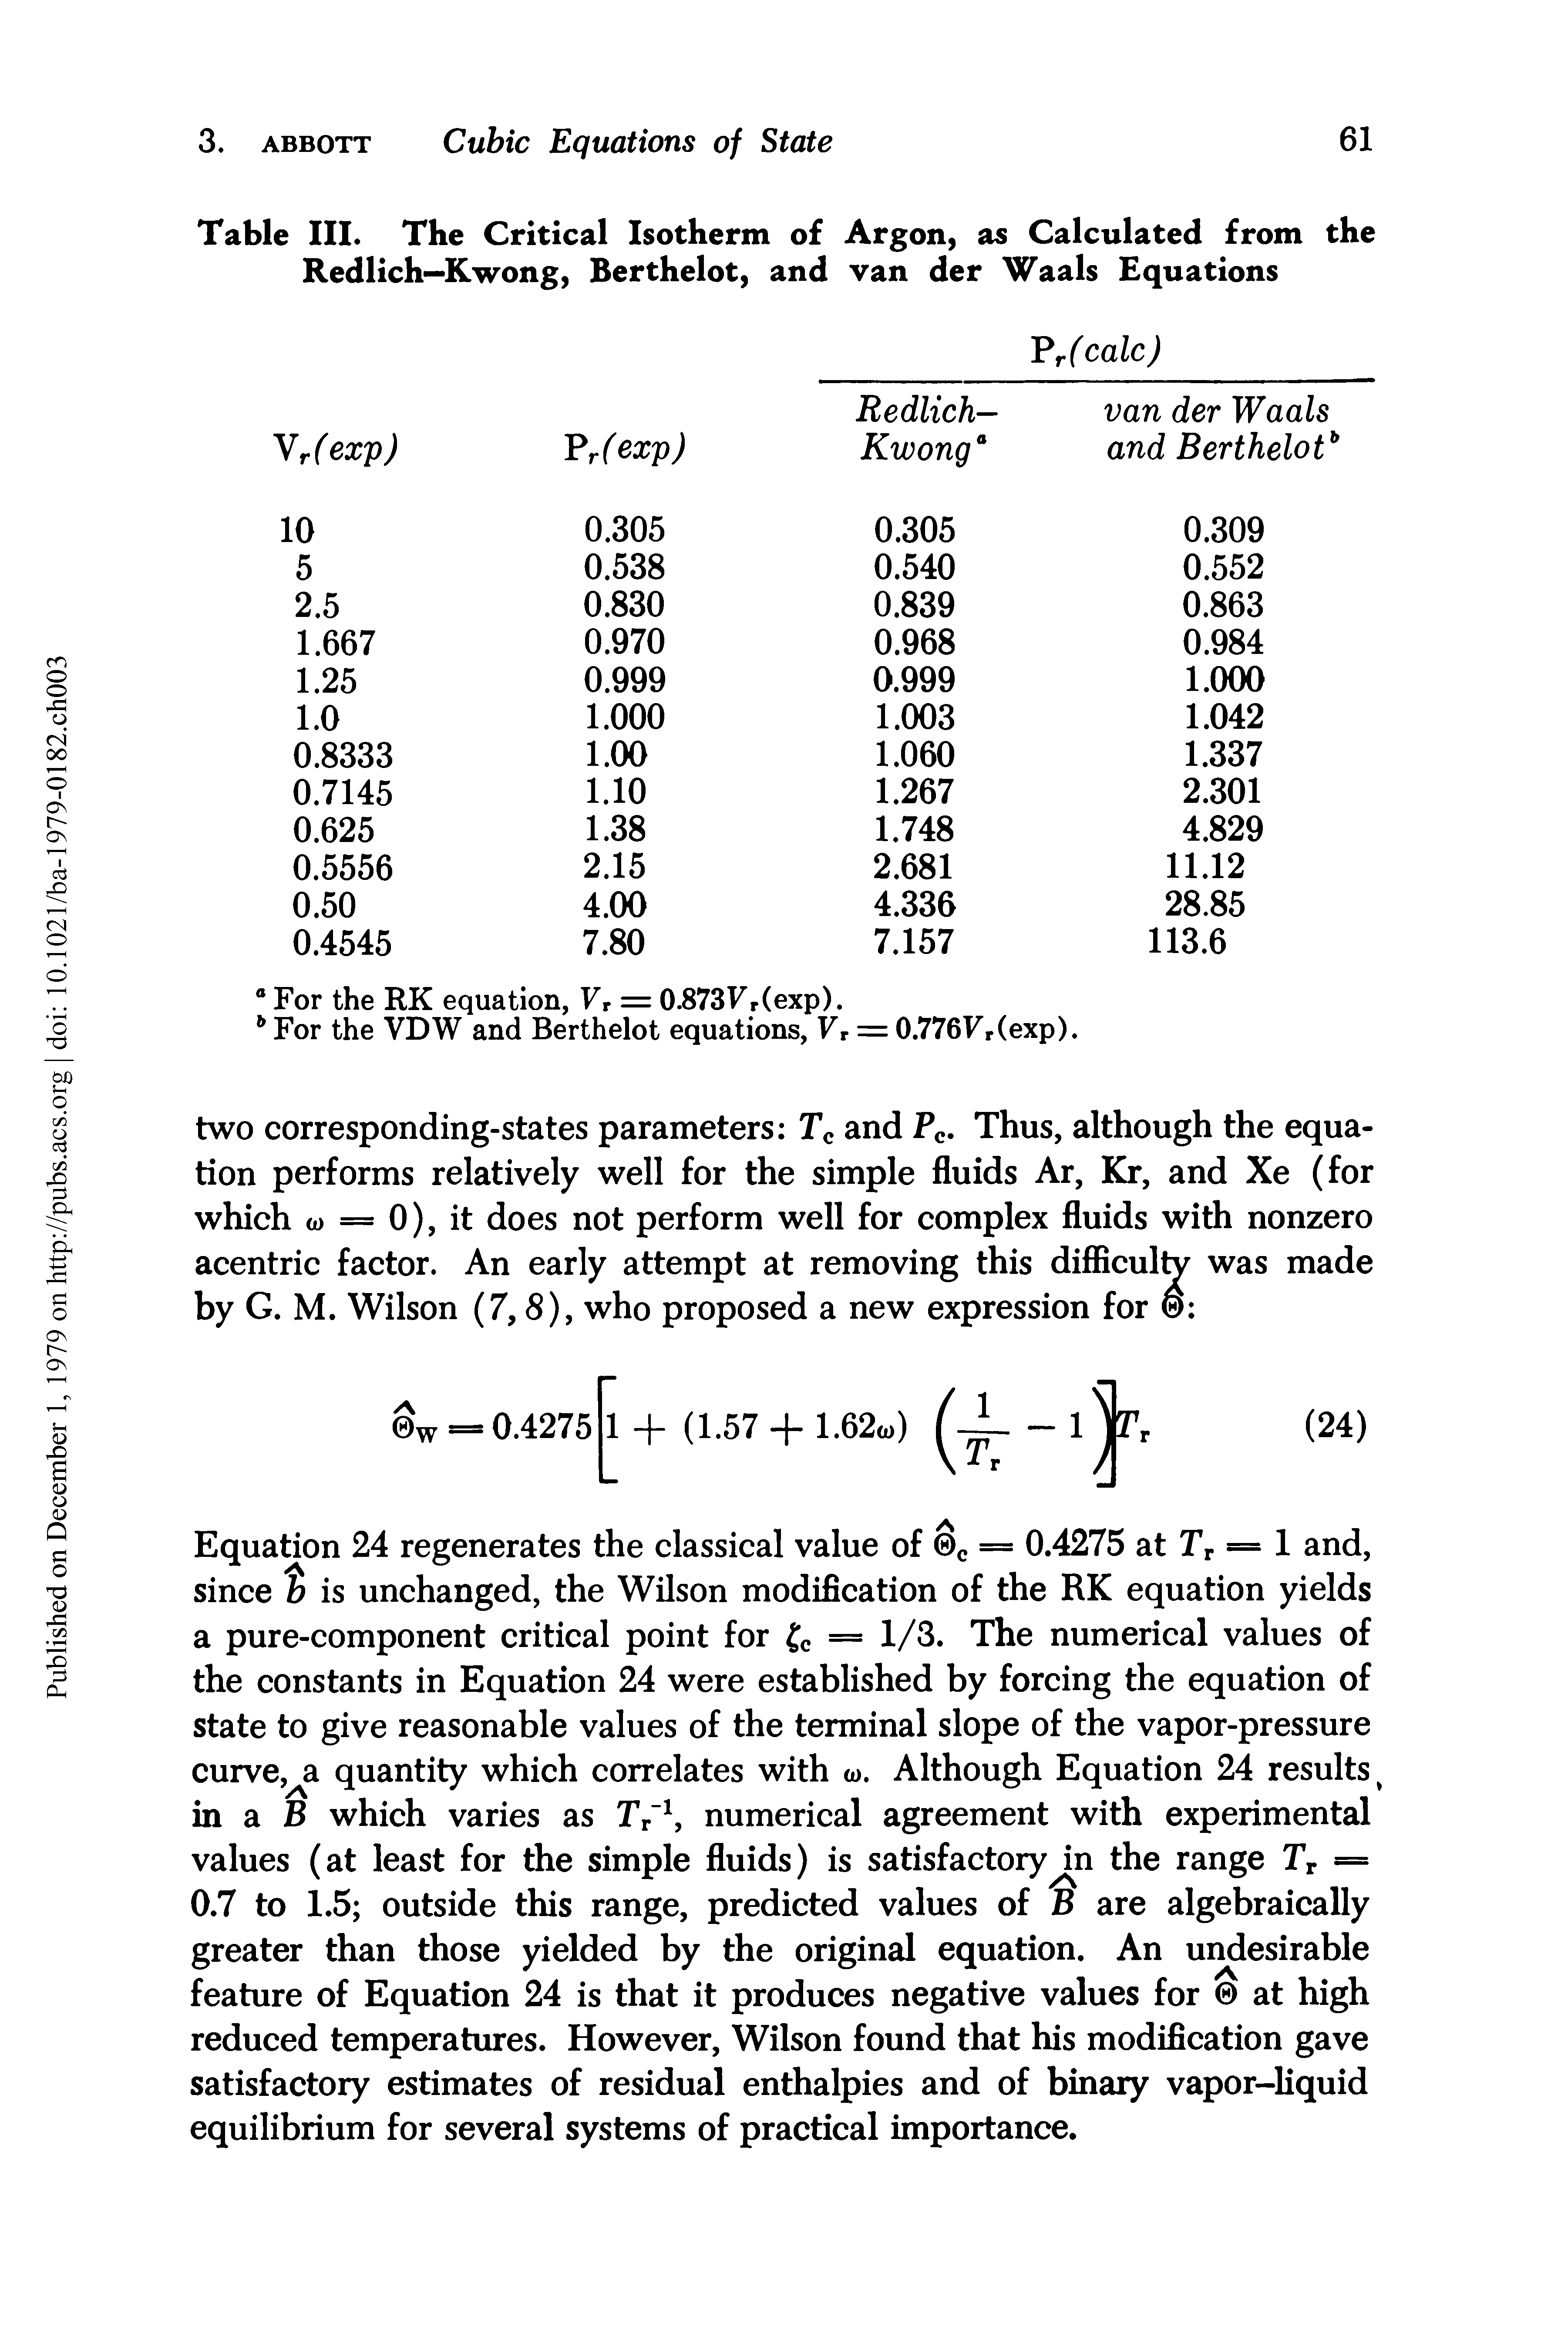 Table III. The Critical Isotherm of Argon, as Calculated from the Redlich—Kwong, Berthelot, and van der Waals Equations...